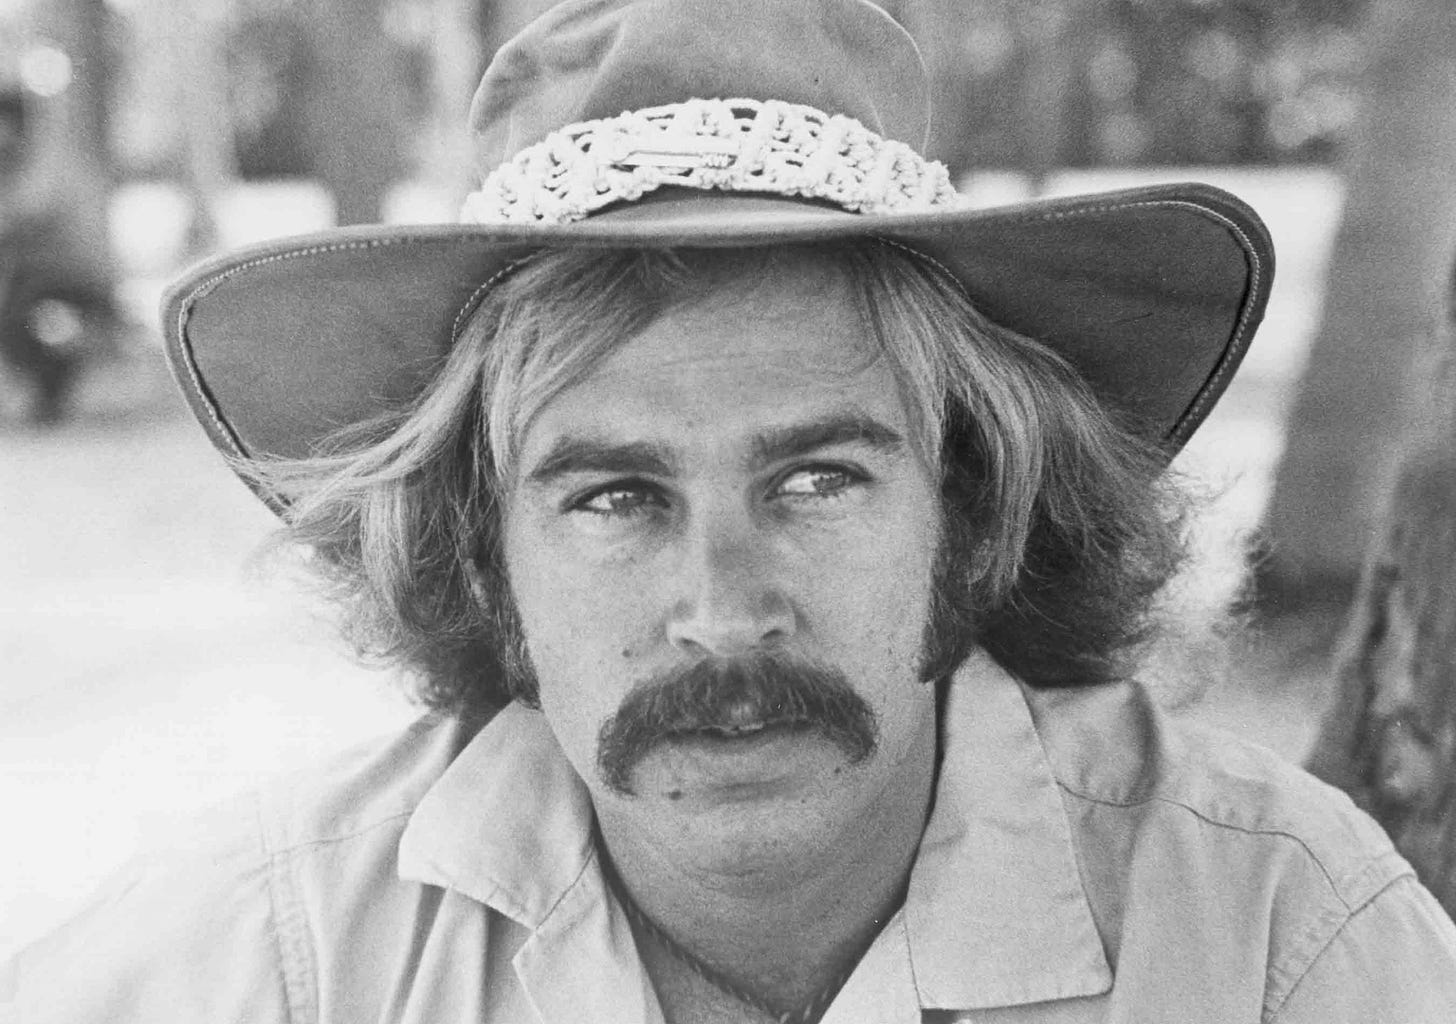 Before Margaritaville: Jimmy Buffett's Outlaw Country Underground Years